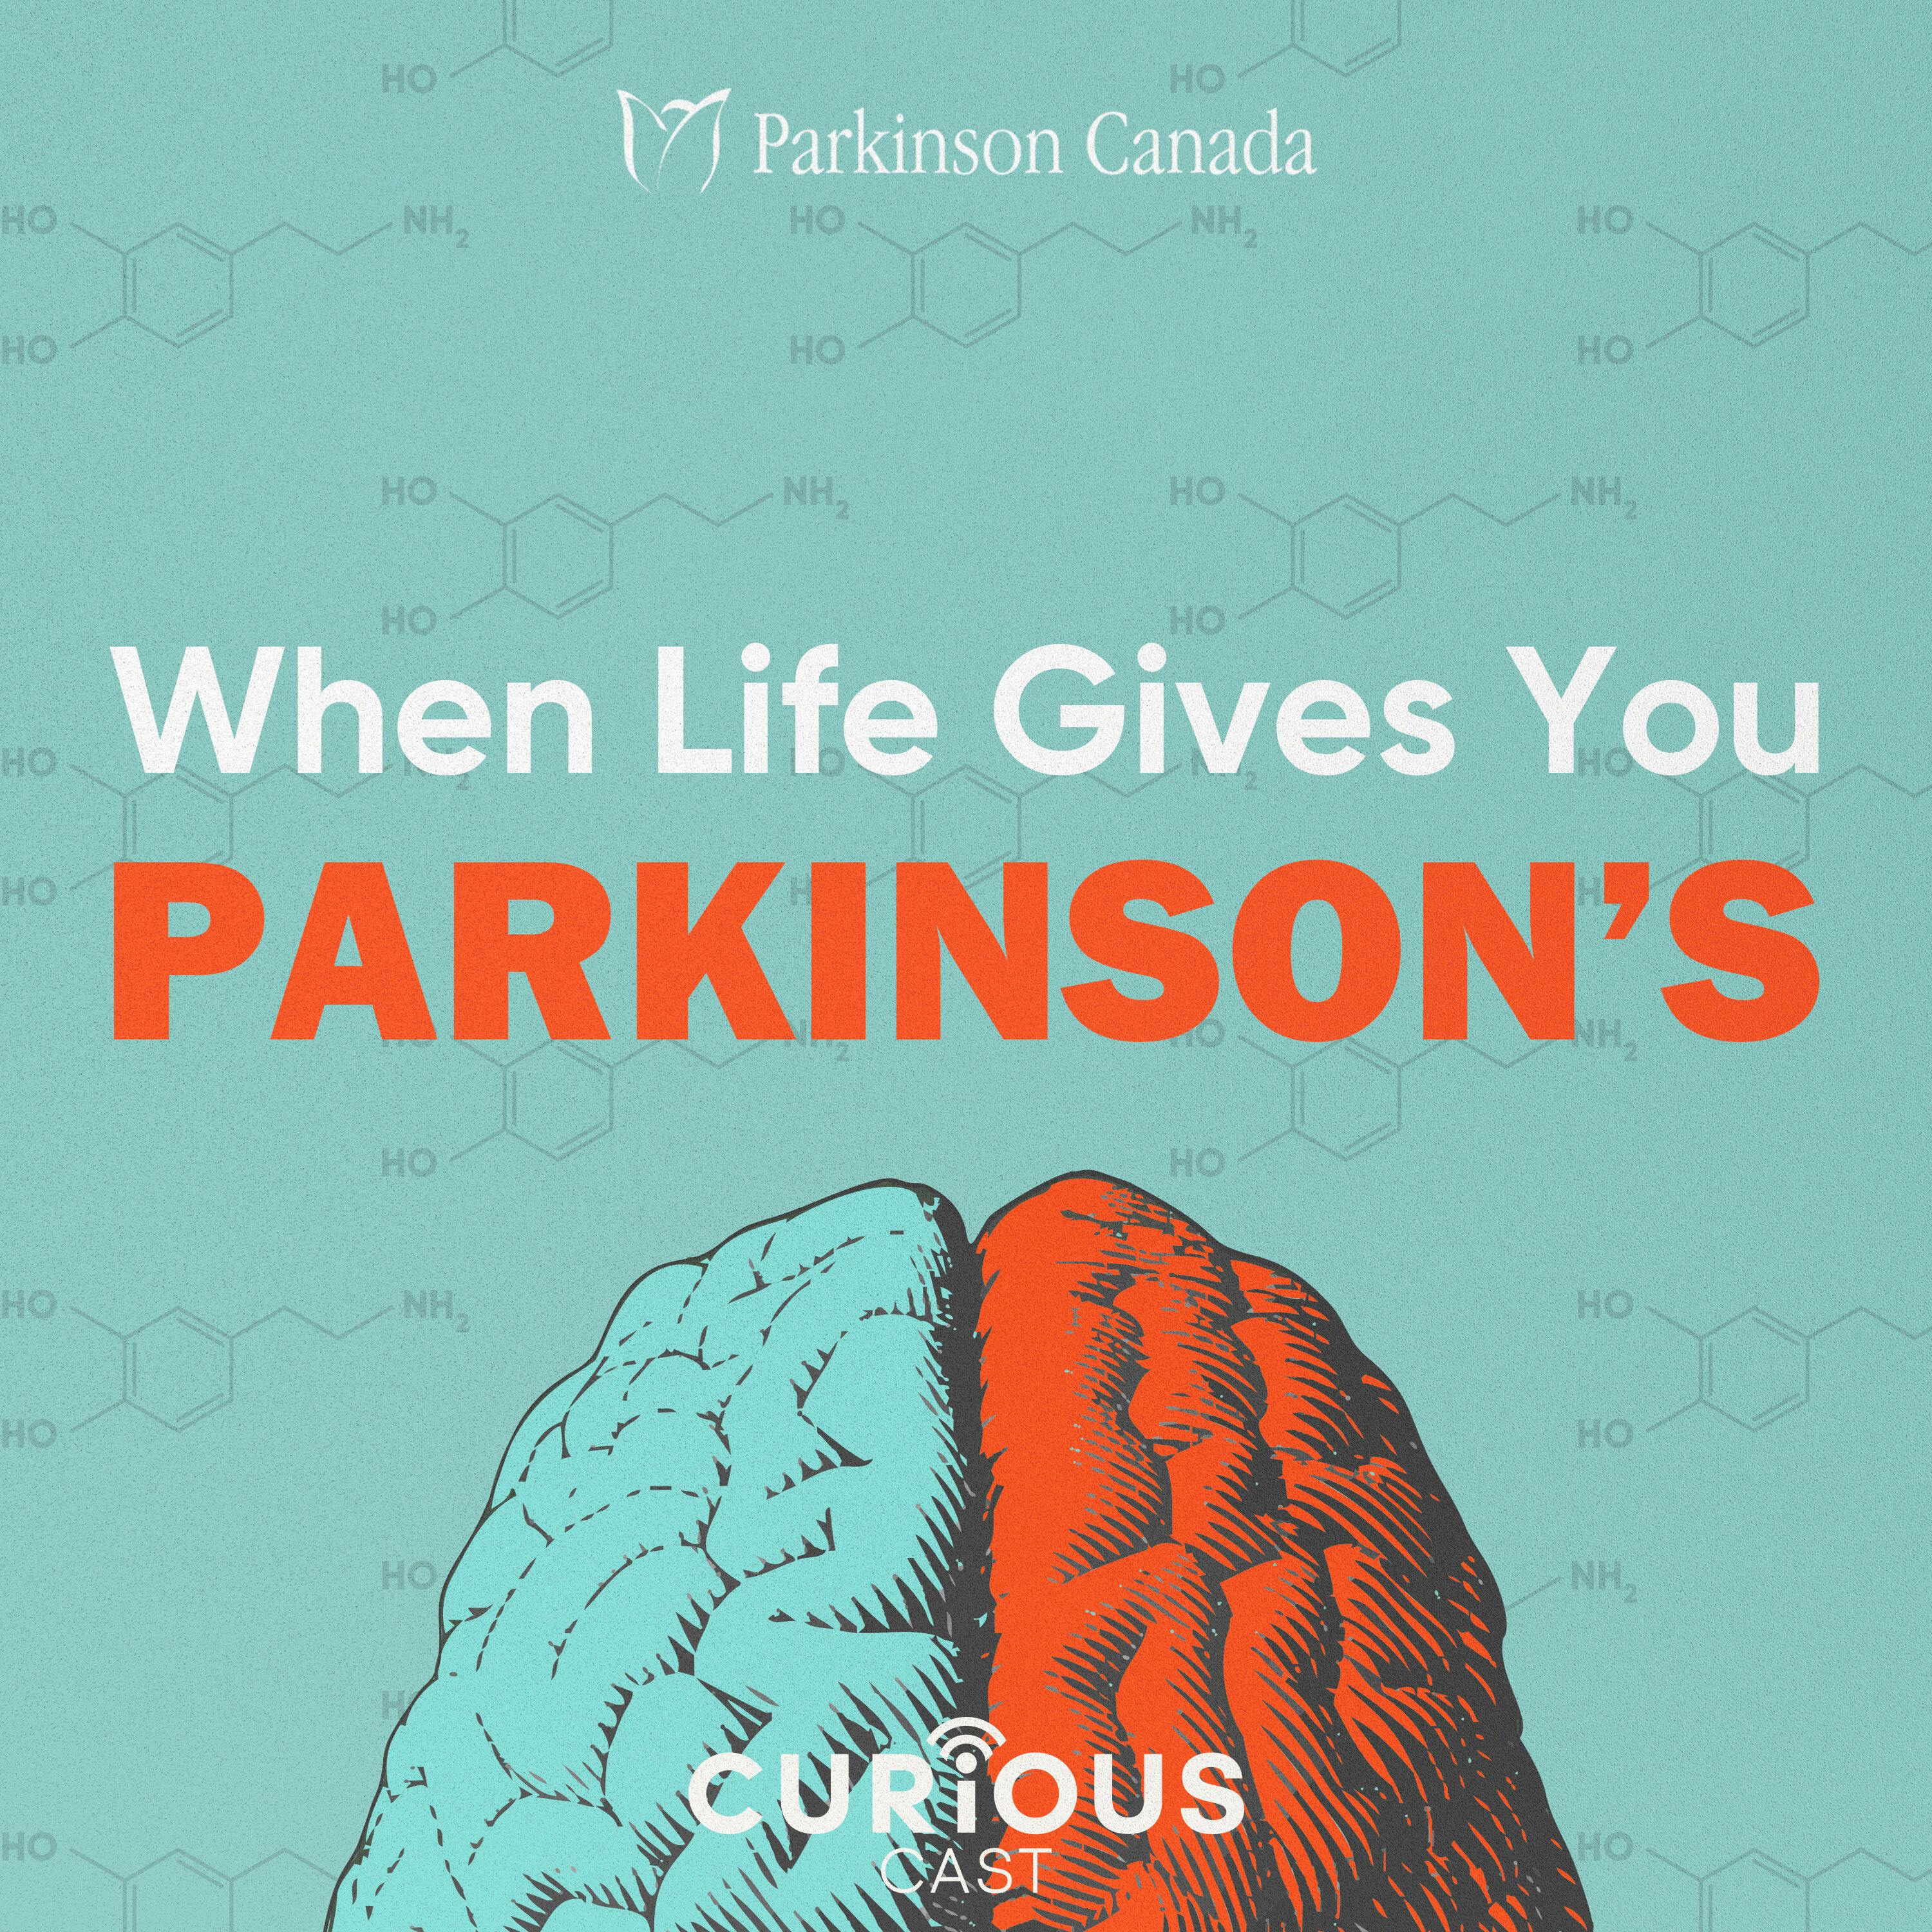 Parkinson’s is not witchcraft or a curse | Parkinson’s Si Buko Uganda